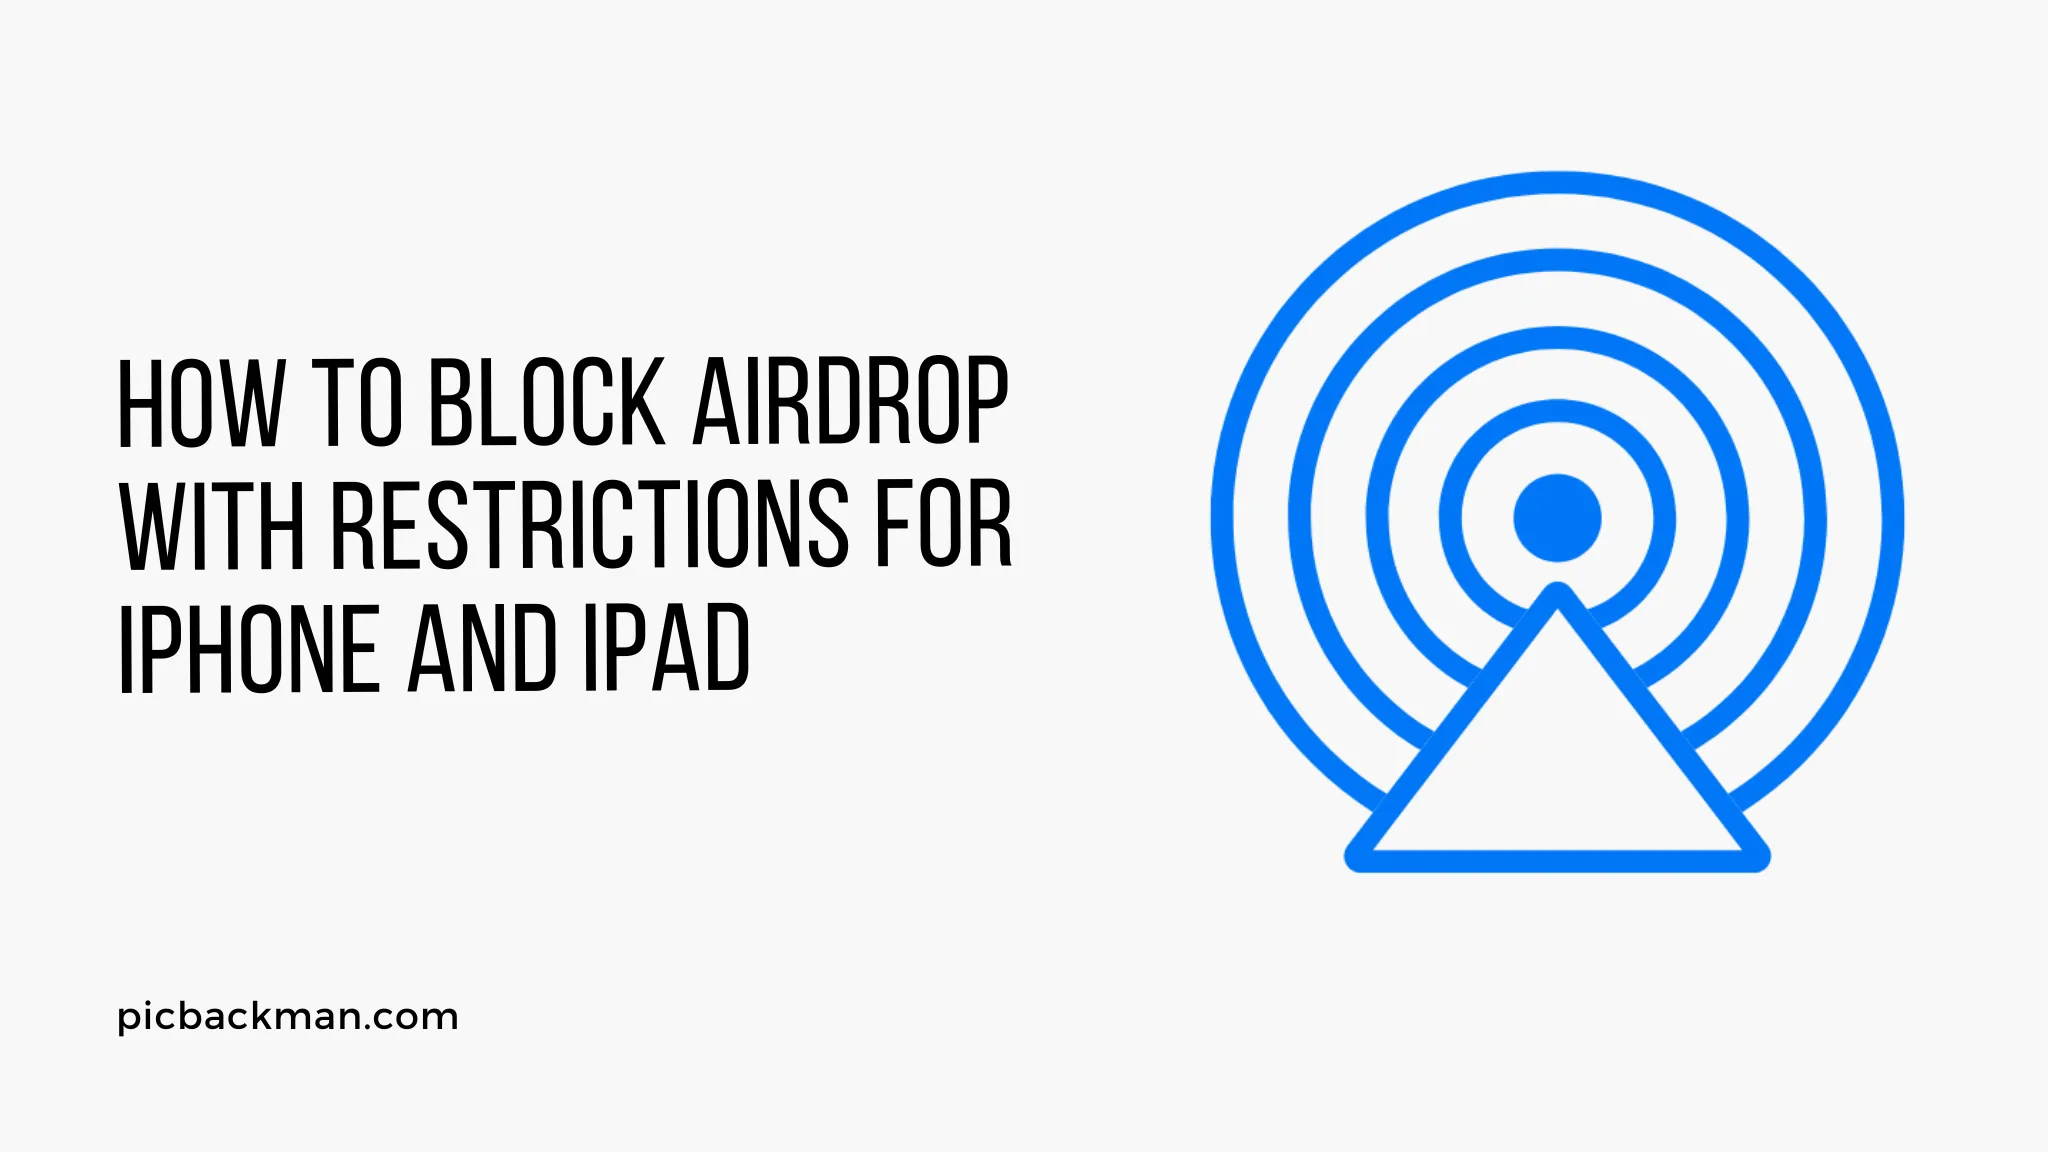 How to block AirDrop with restrictions for iPhone and iPad?